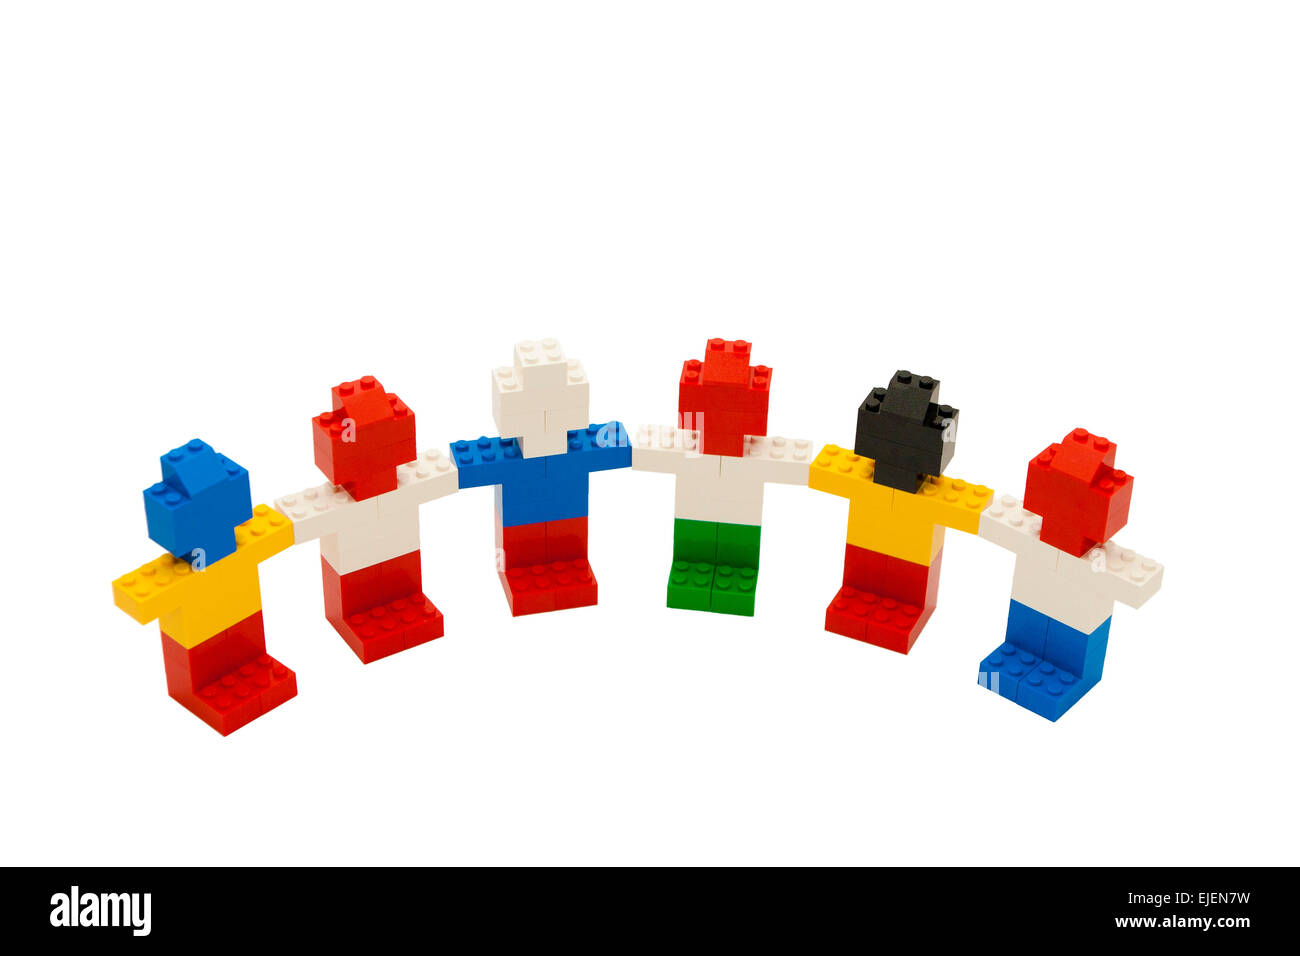 Lego toys - six colorful little people on a background Stock Photo